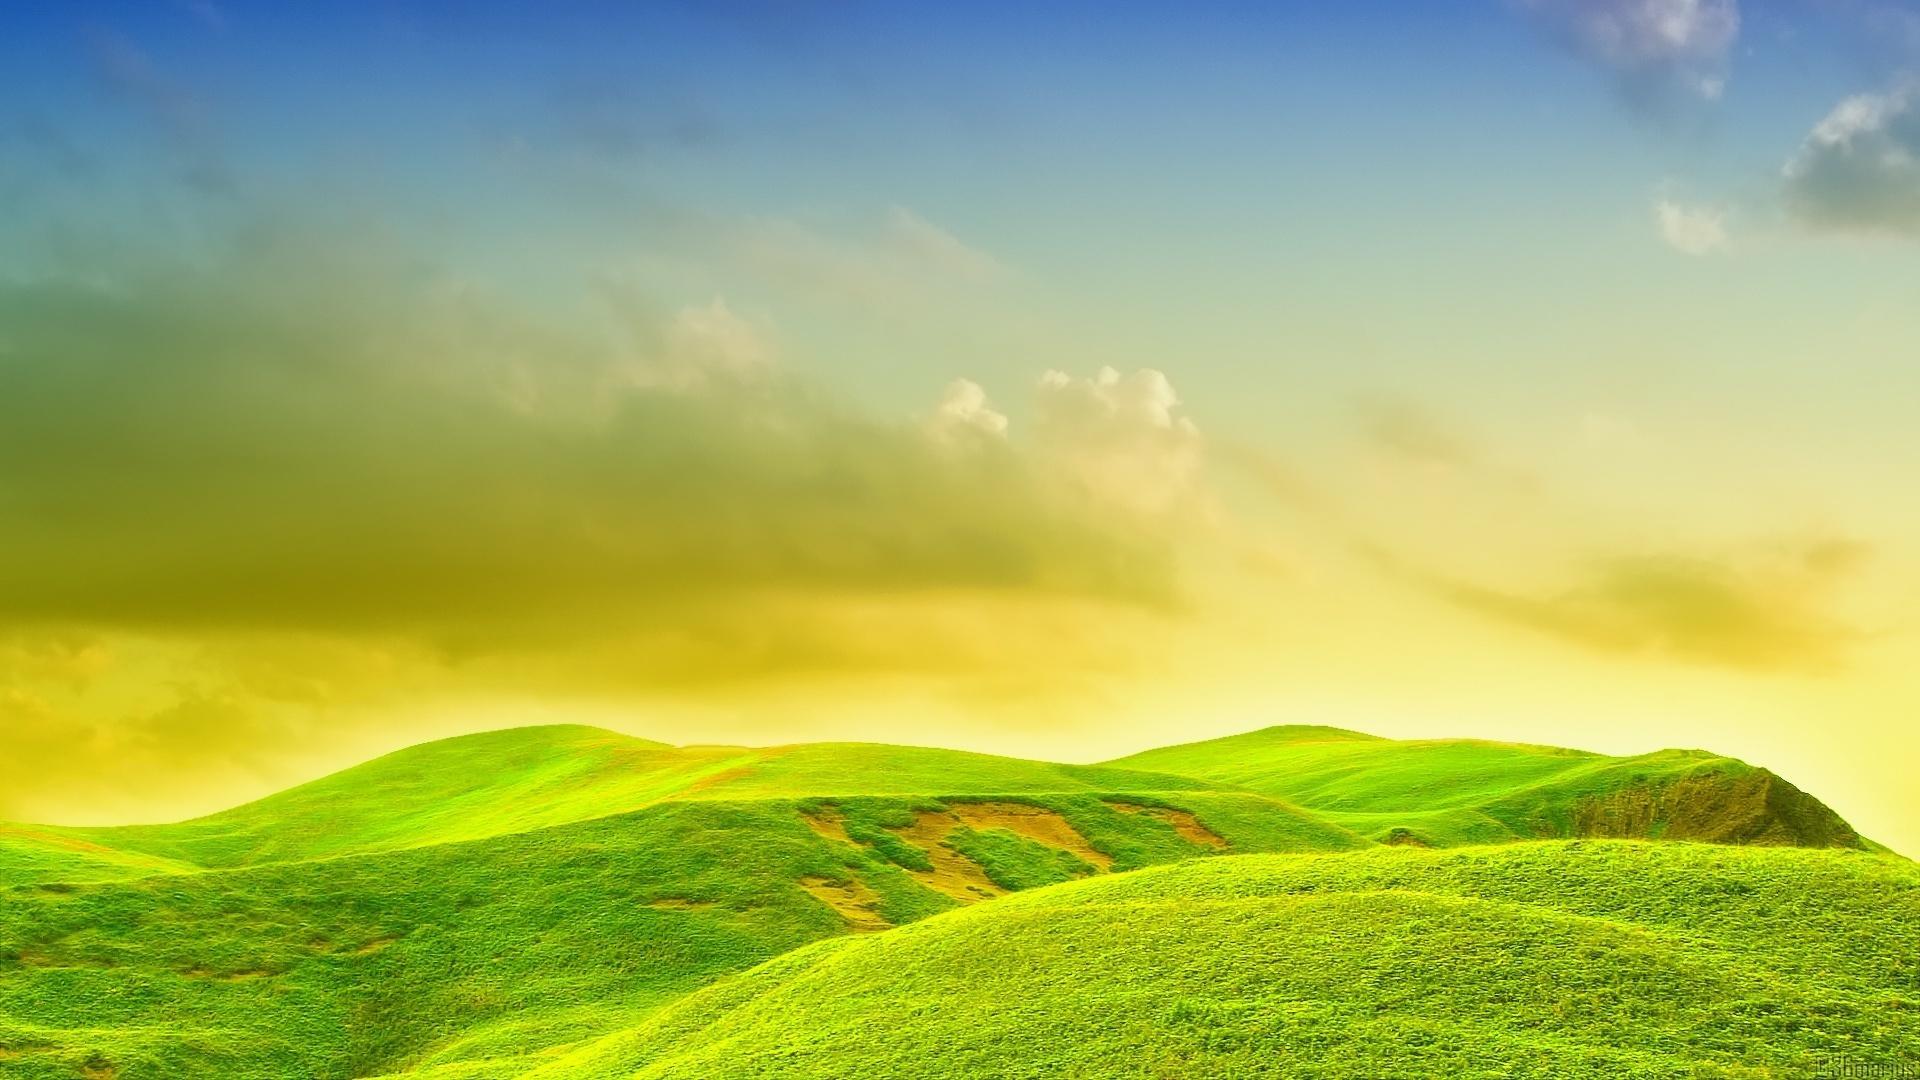 Man behind famous Windows XP wallpaper wishes he'd negotiated a better  licensing deal